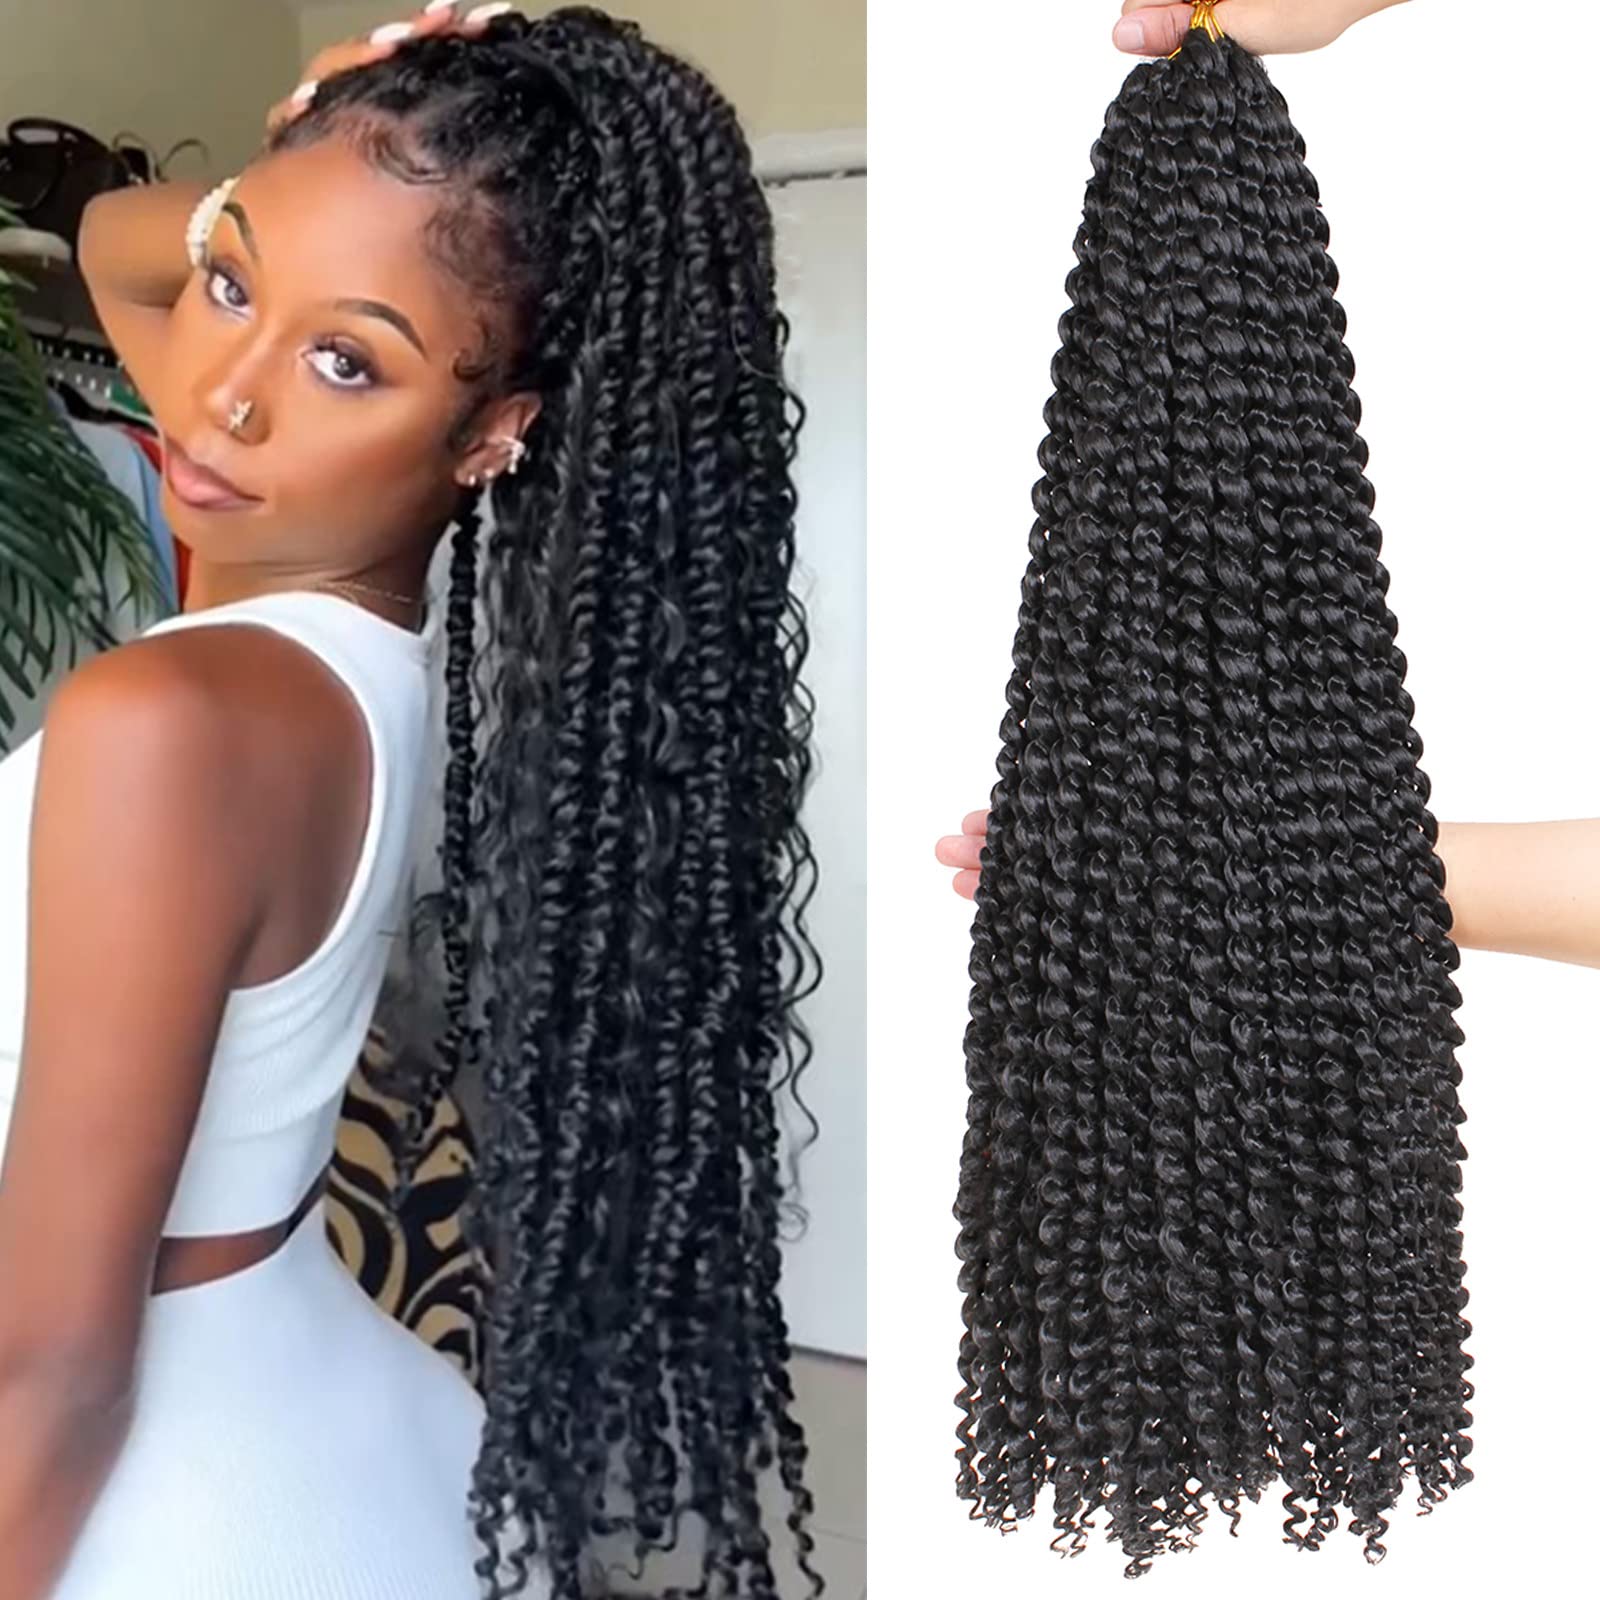 5 pack Passion Twist Hair, 18 Inch Passion Twist Crochet Hair Ombre Water  Wave Crochet Hair for Women Passion Twist Braiding Hair Long Bohemian Curly